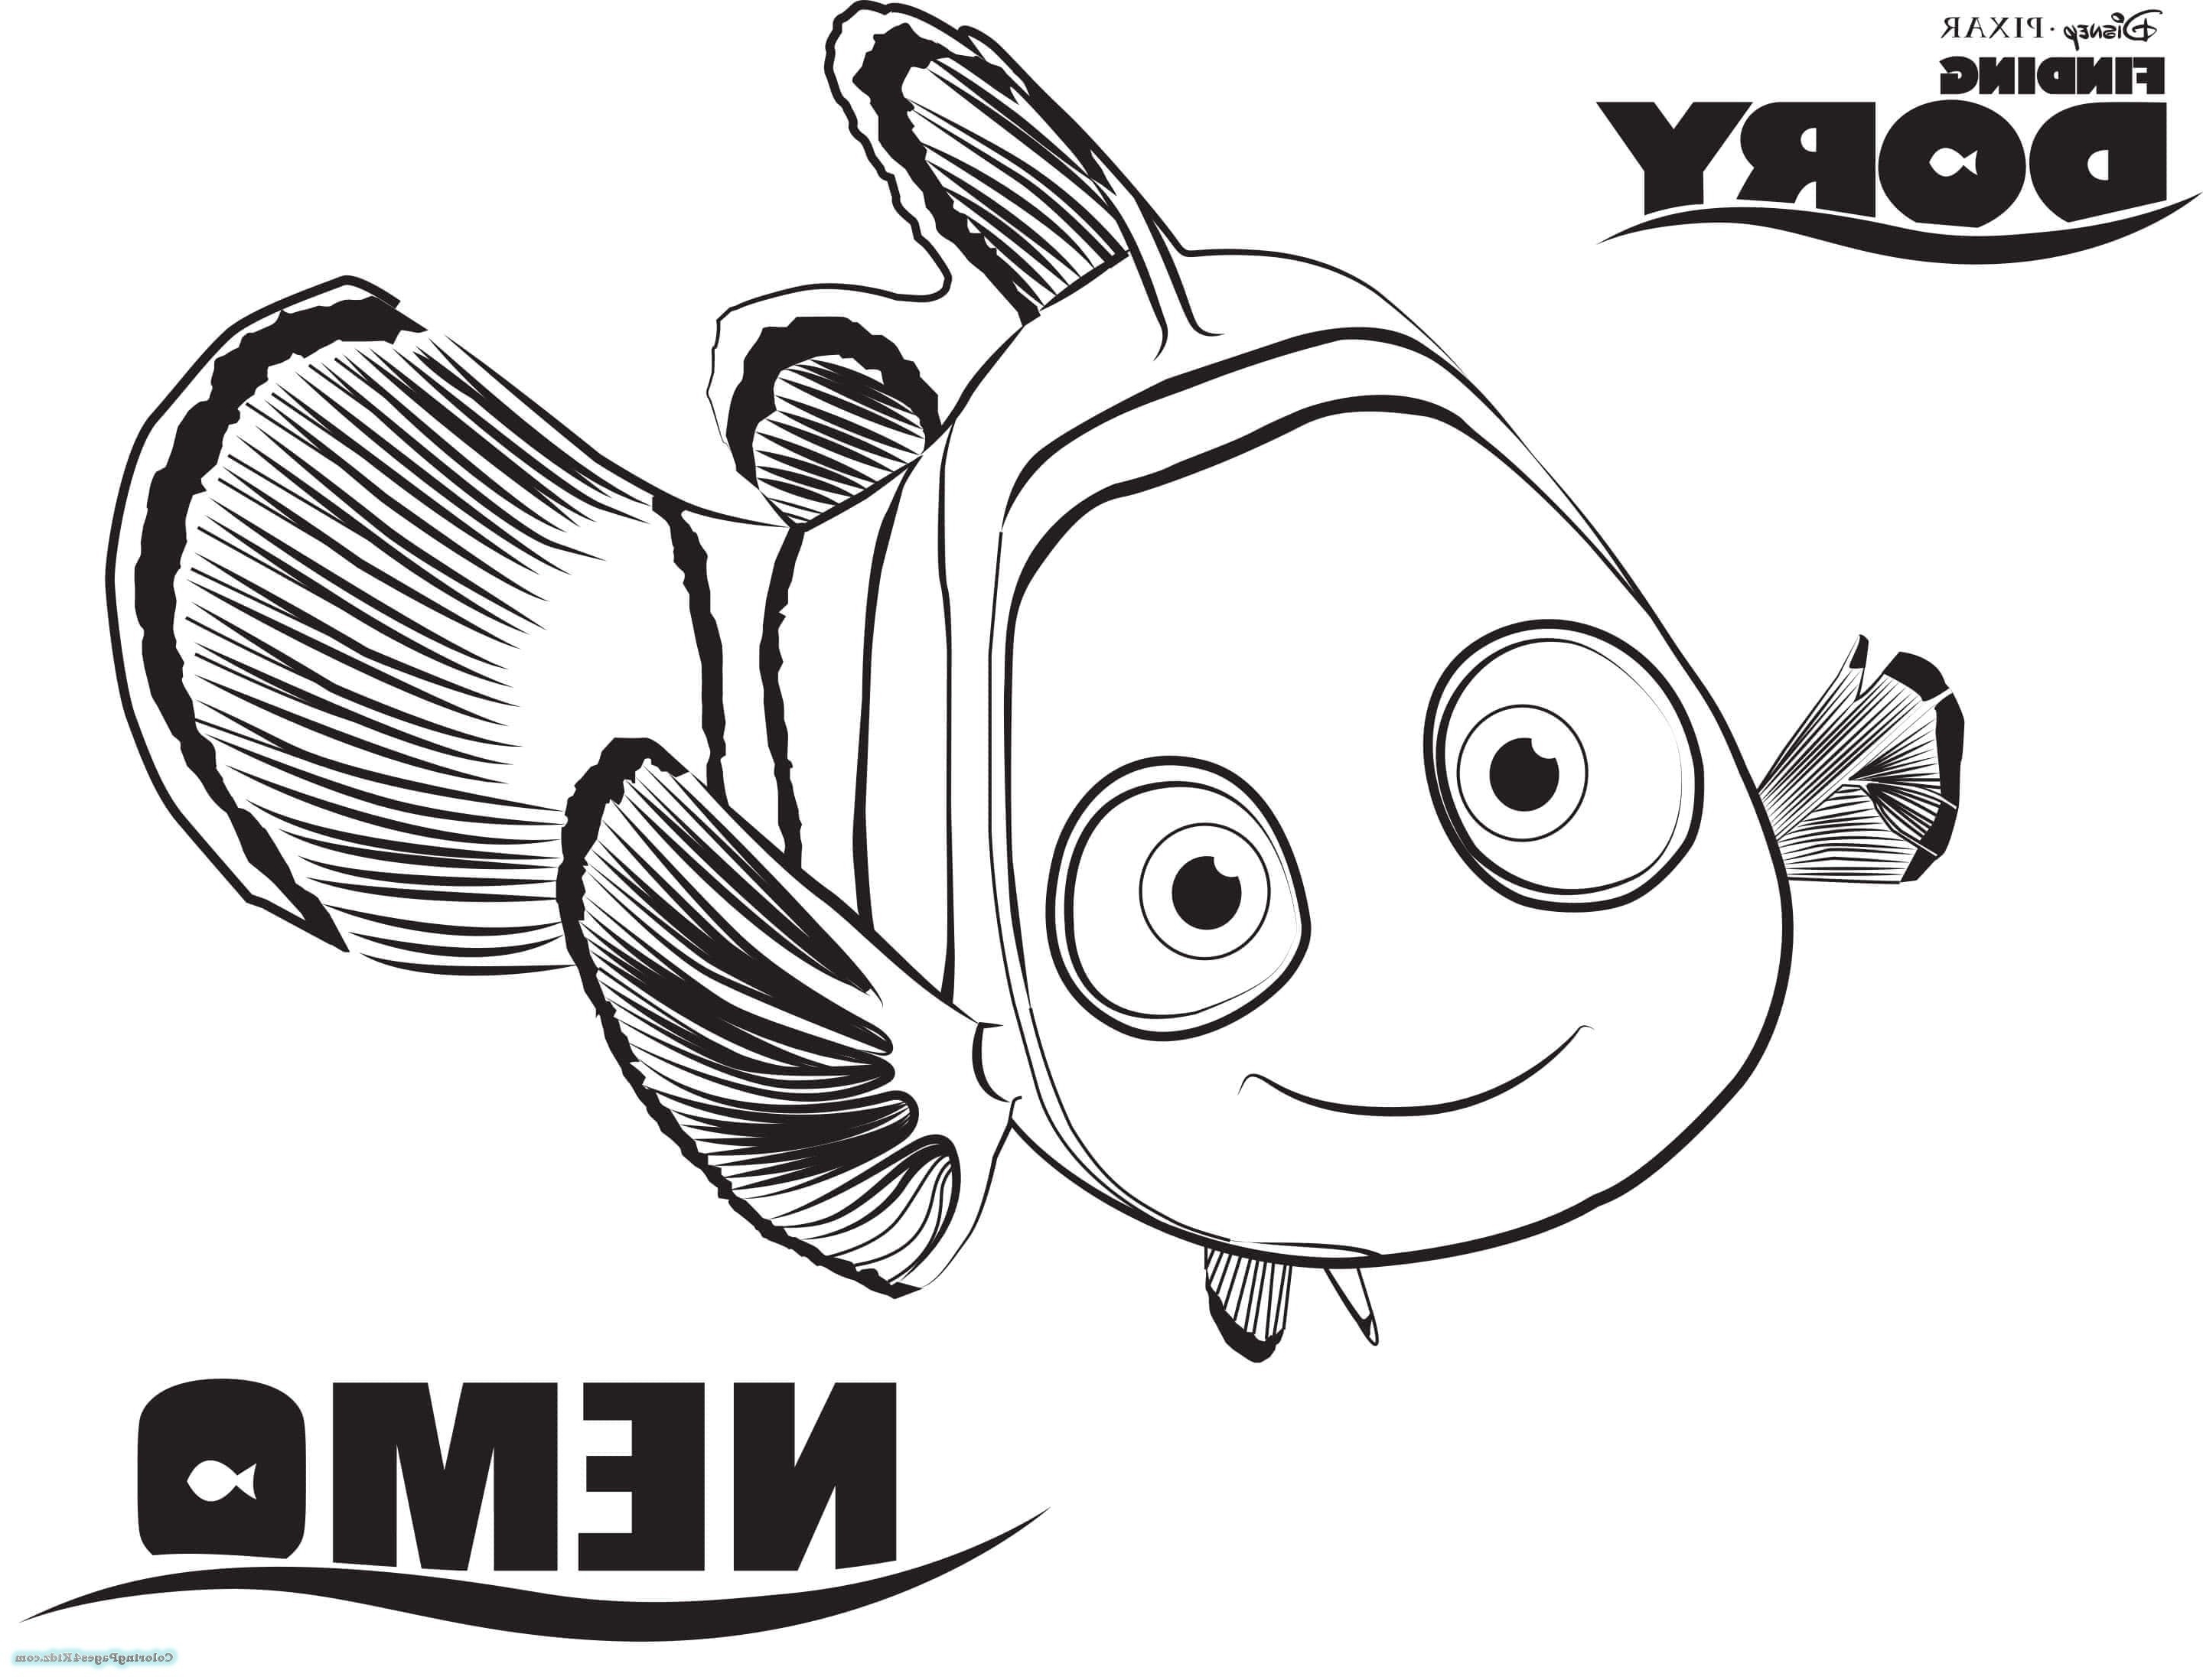 Finding Nemo Characters Coloring Pages Coloring Pages Coloring Pagesnding Nemo To Print Free Sheets